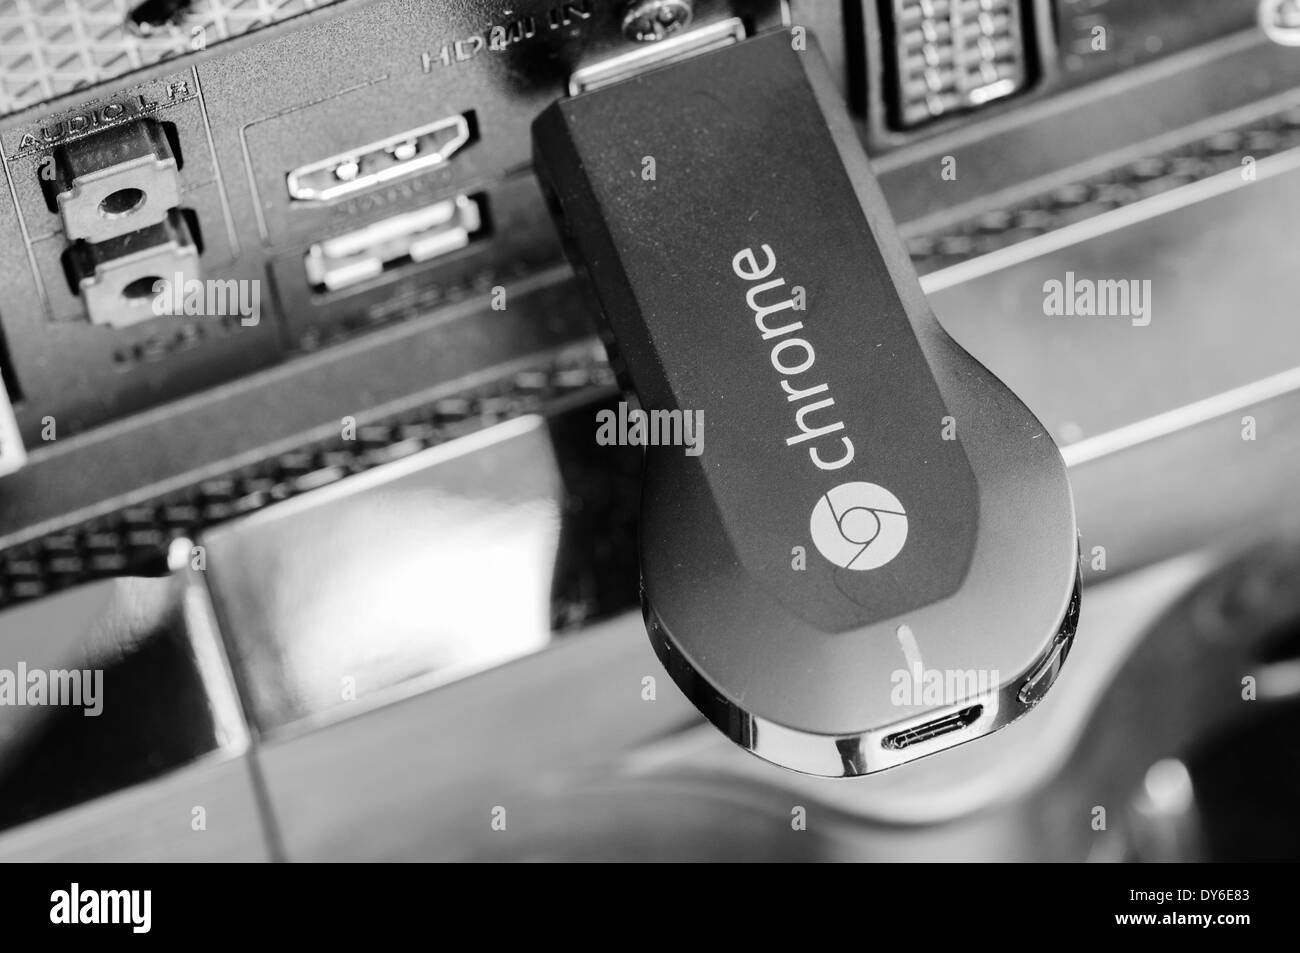 Google Chromecast TV streaming device plugged into the HDMI port of a television Stock Photo